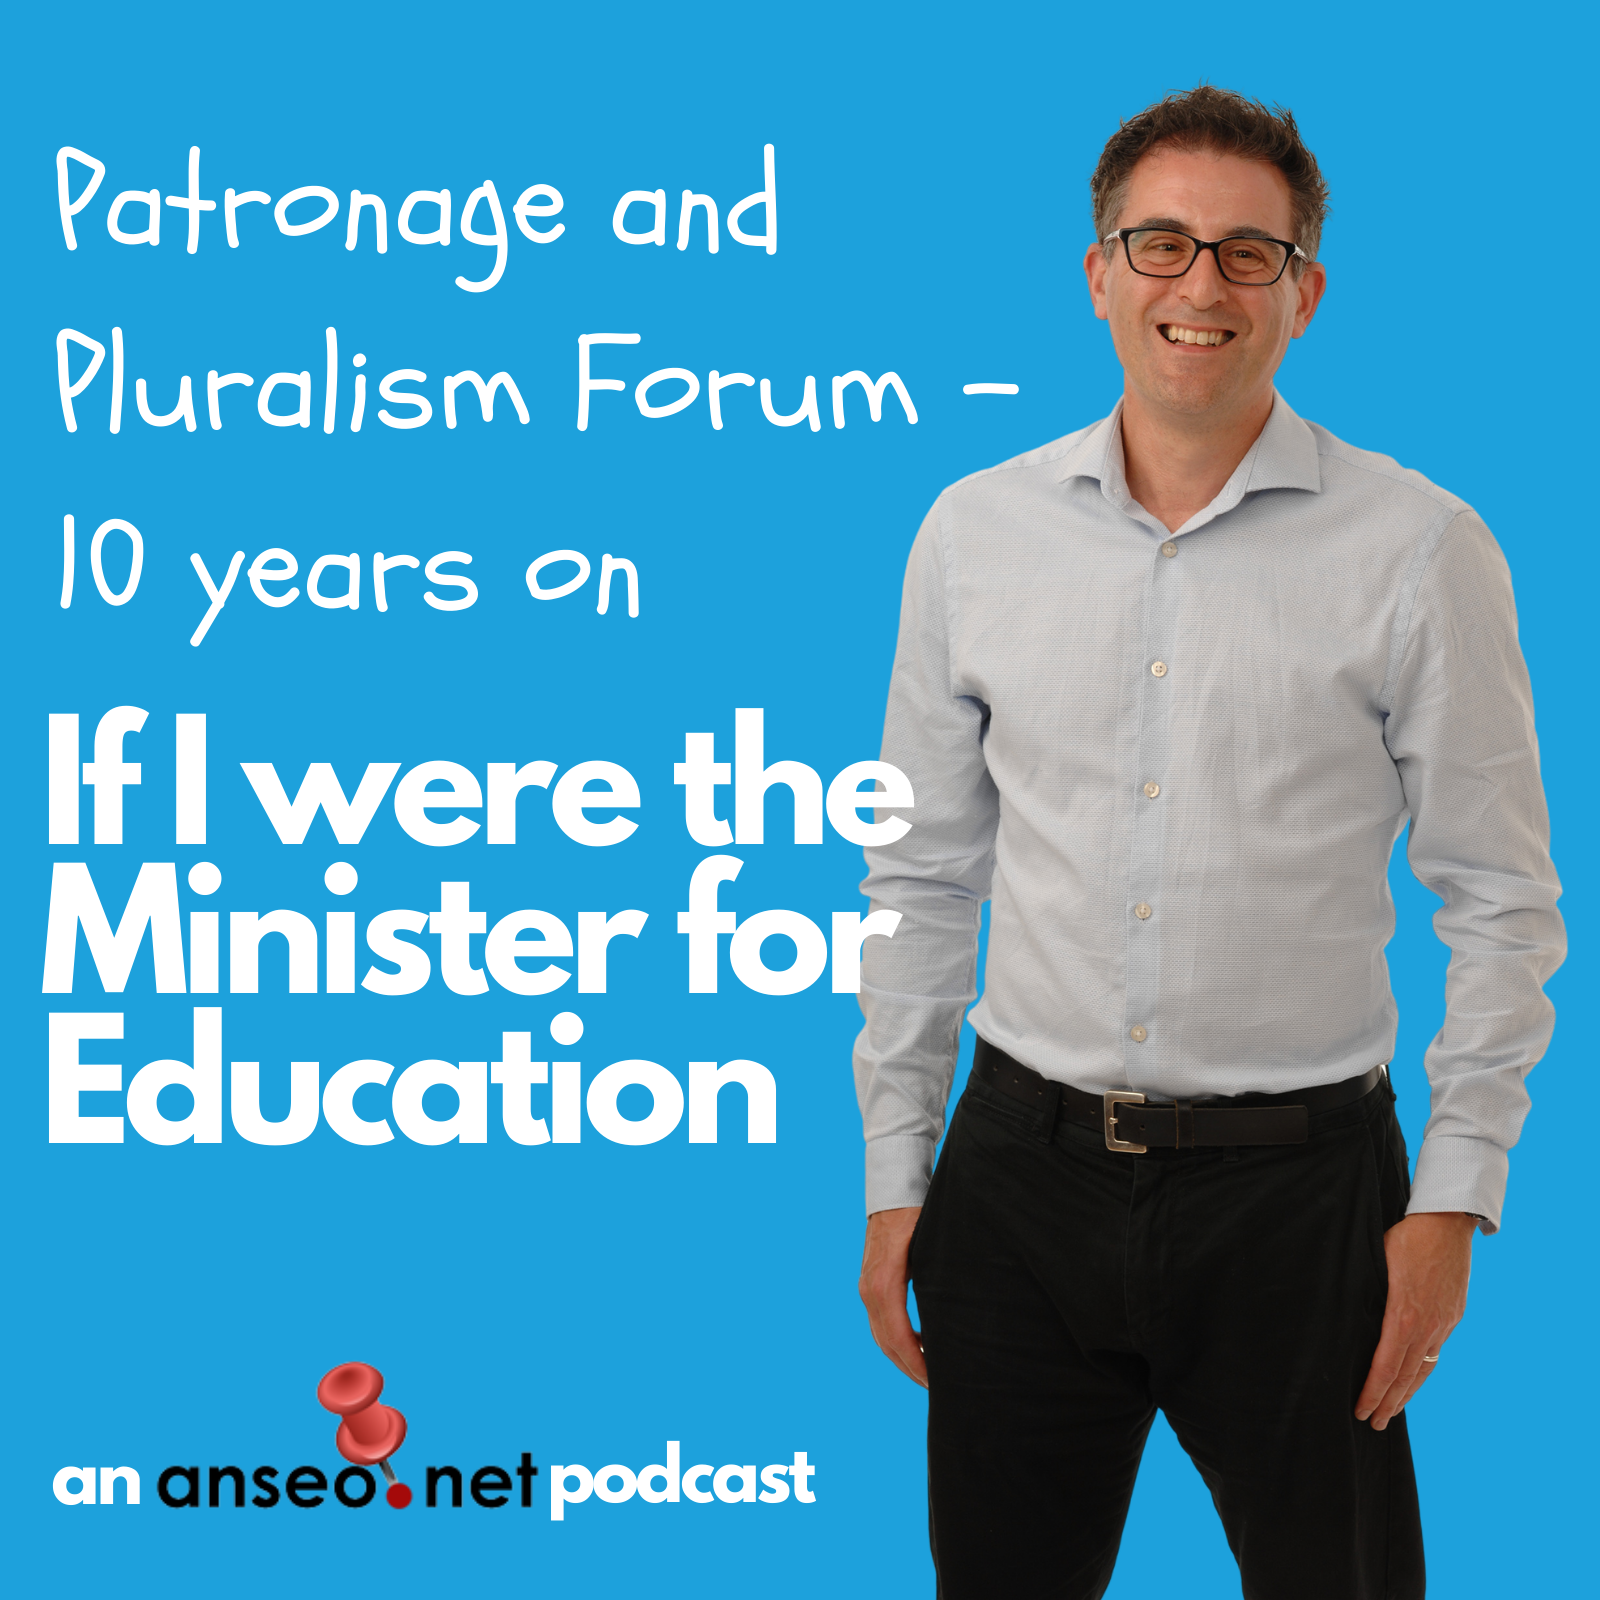 Patronage and Pluralism Forum 10 years on: The Solution and The Future